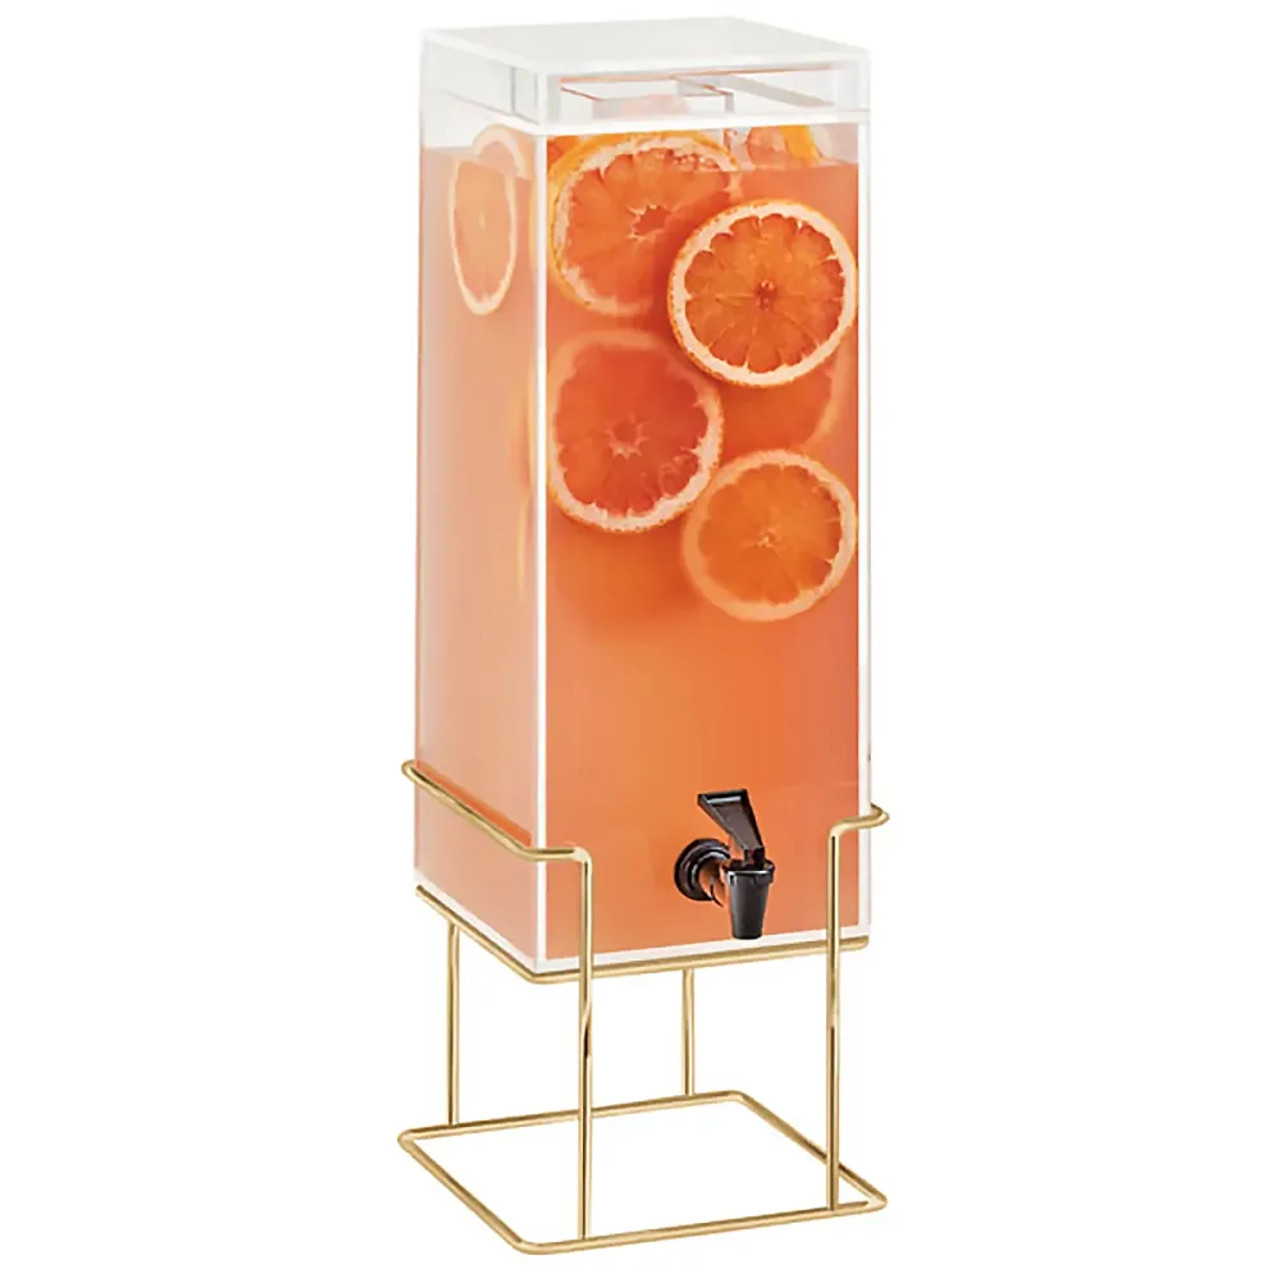 Cal-Mil 3 gal Beverage Dispenser with Ice Tube - Plastic Tank, Brass Wire Base - Chicken Pieces